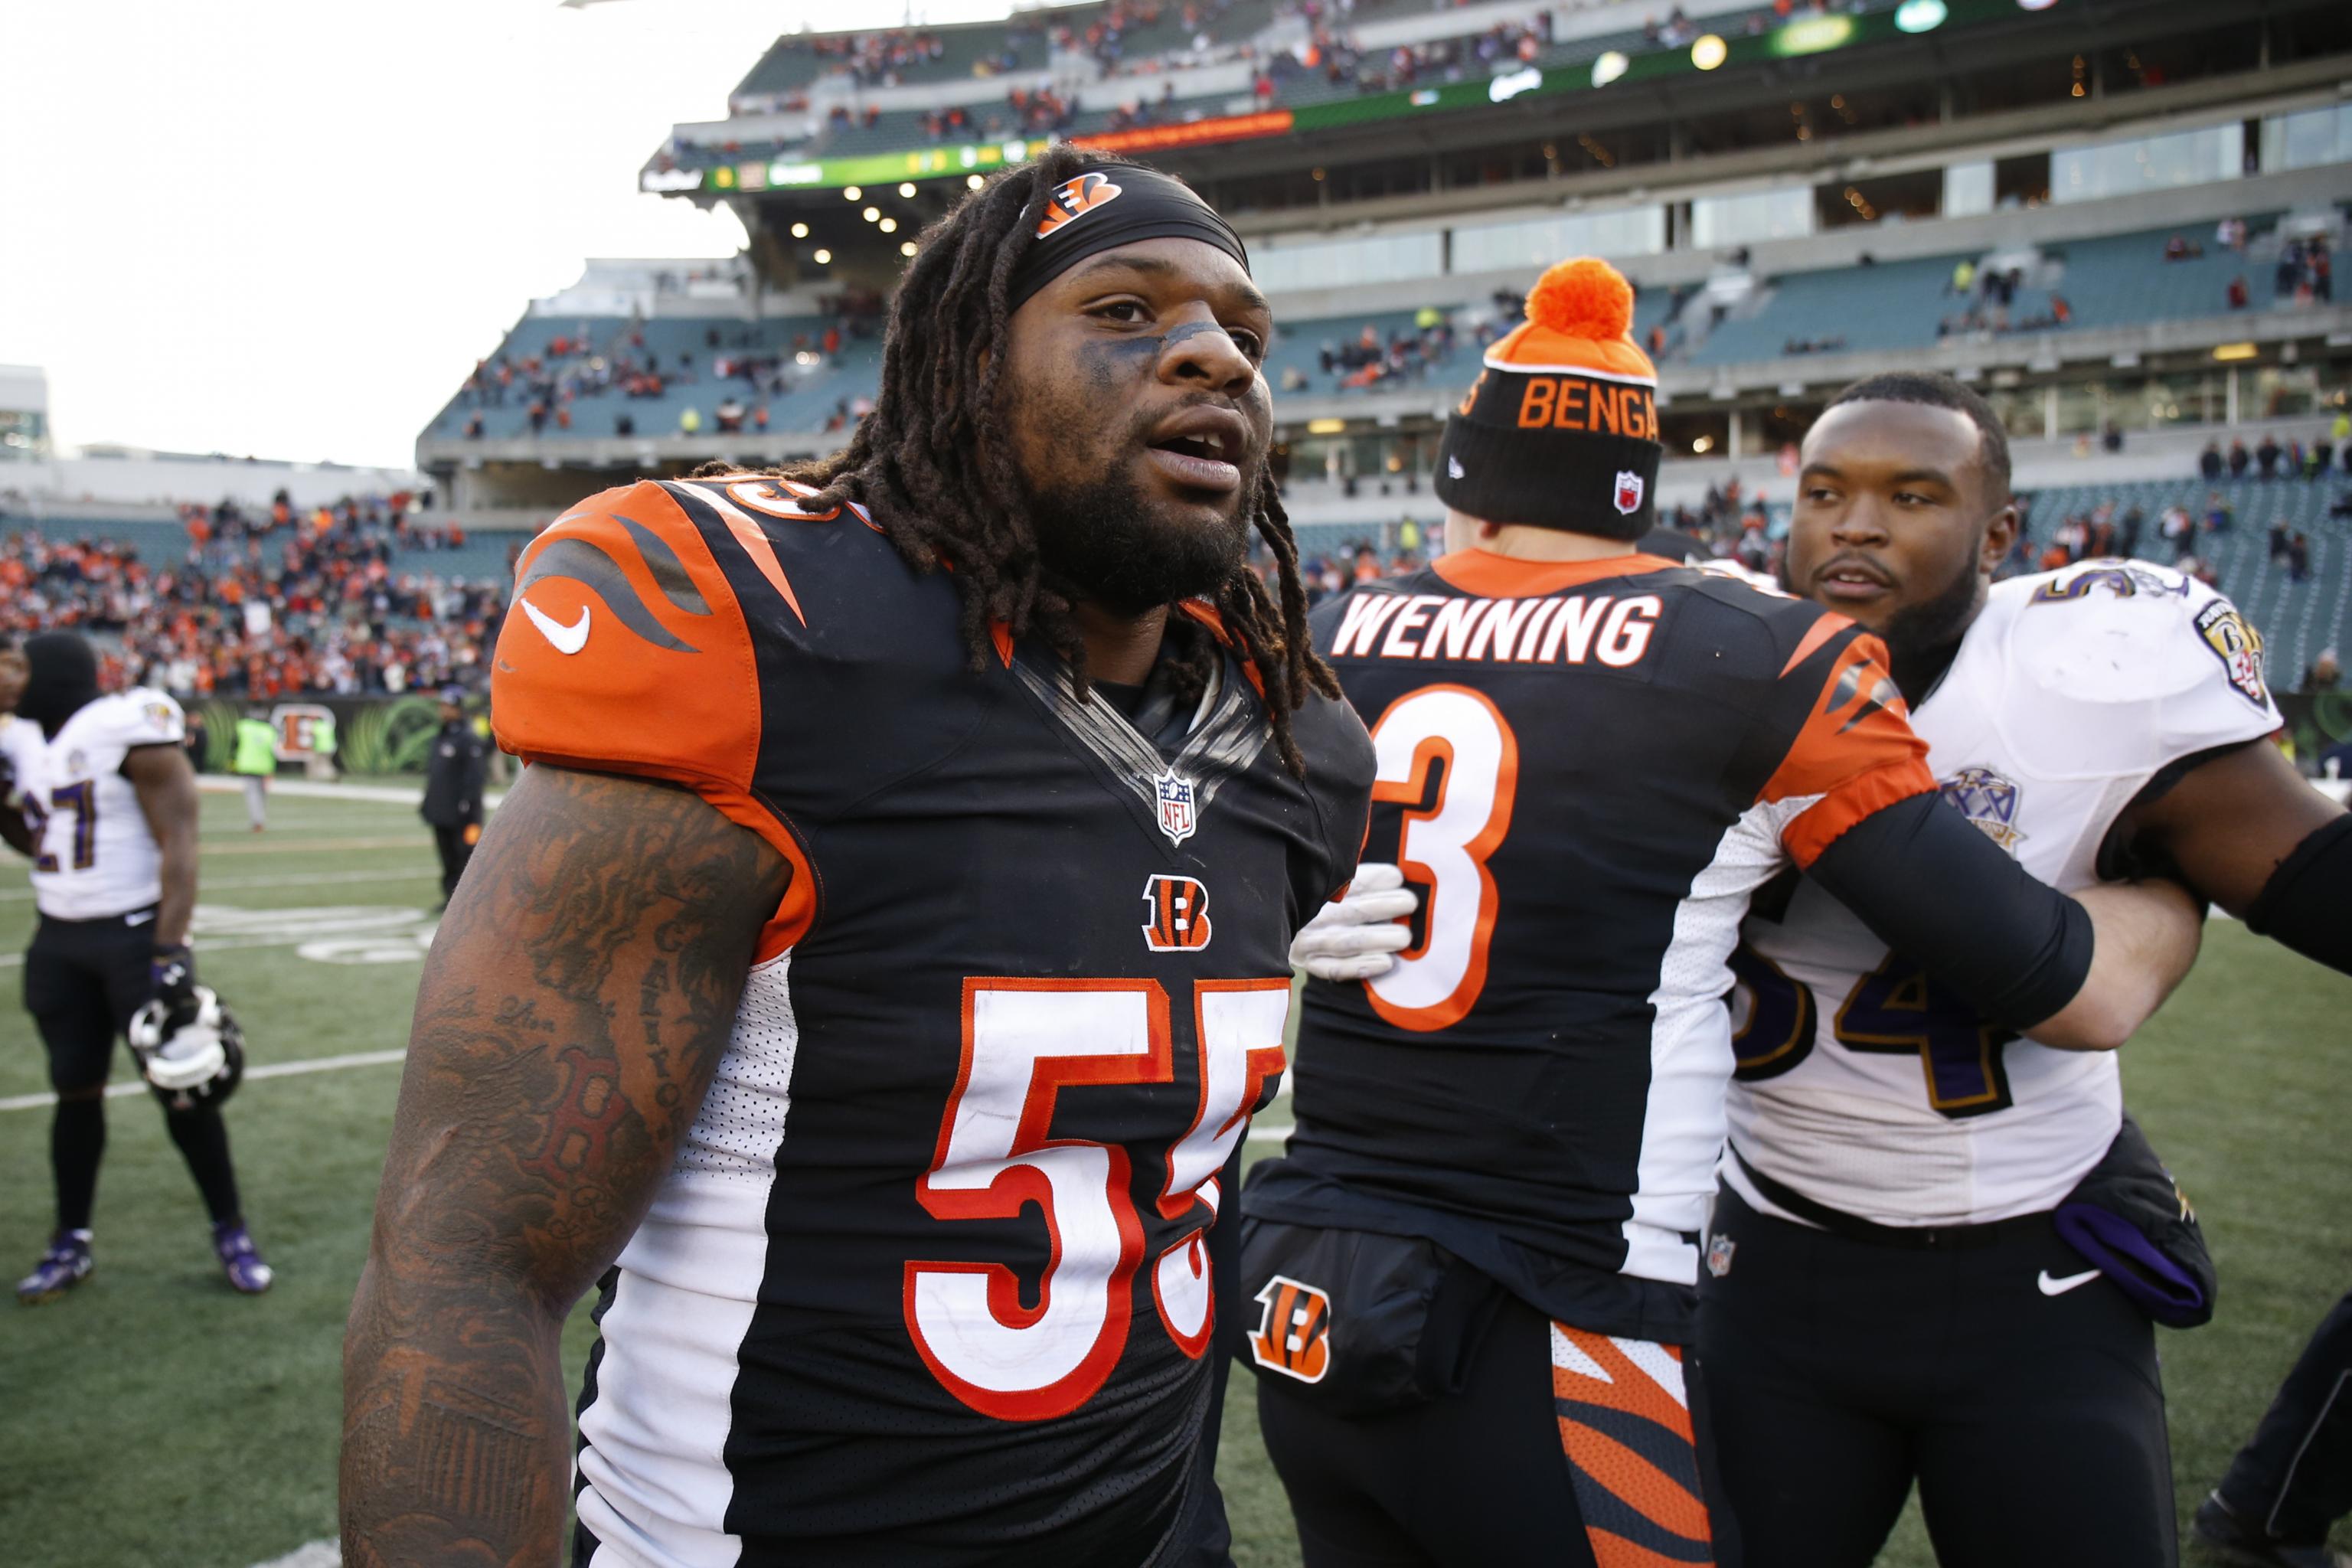 Vontaze Burfict Suspended for Violations of Safety Rules: Details